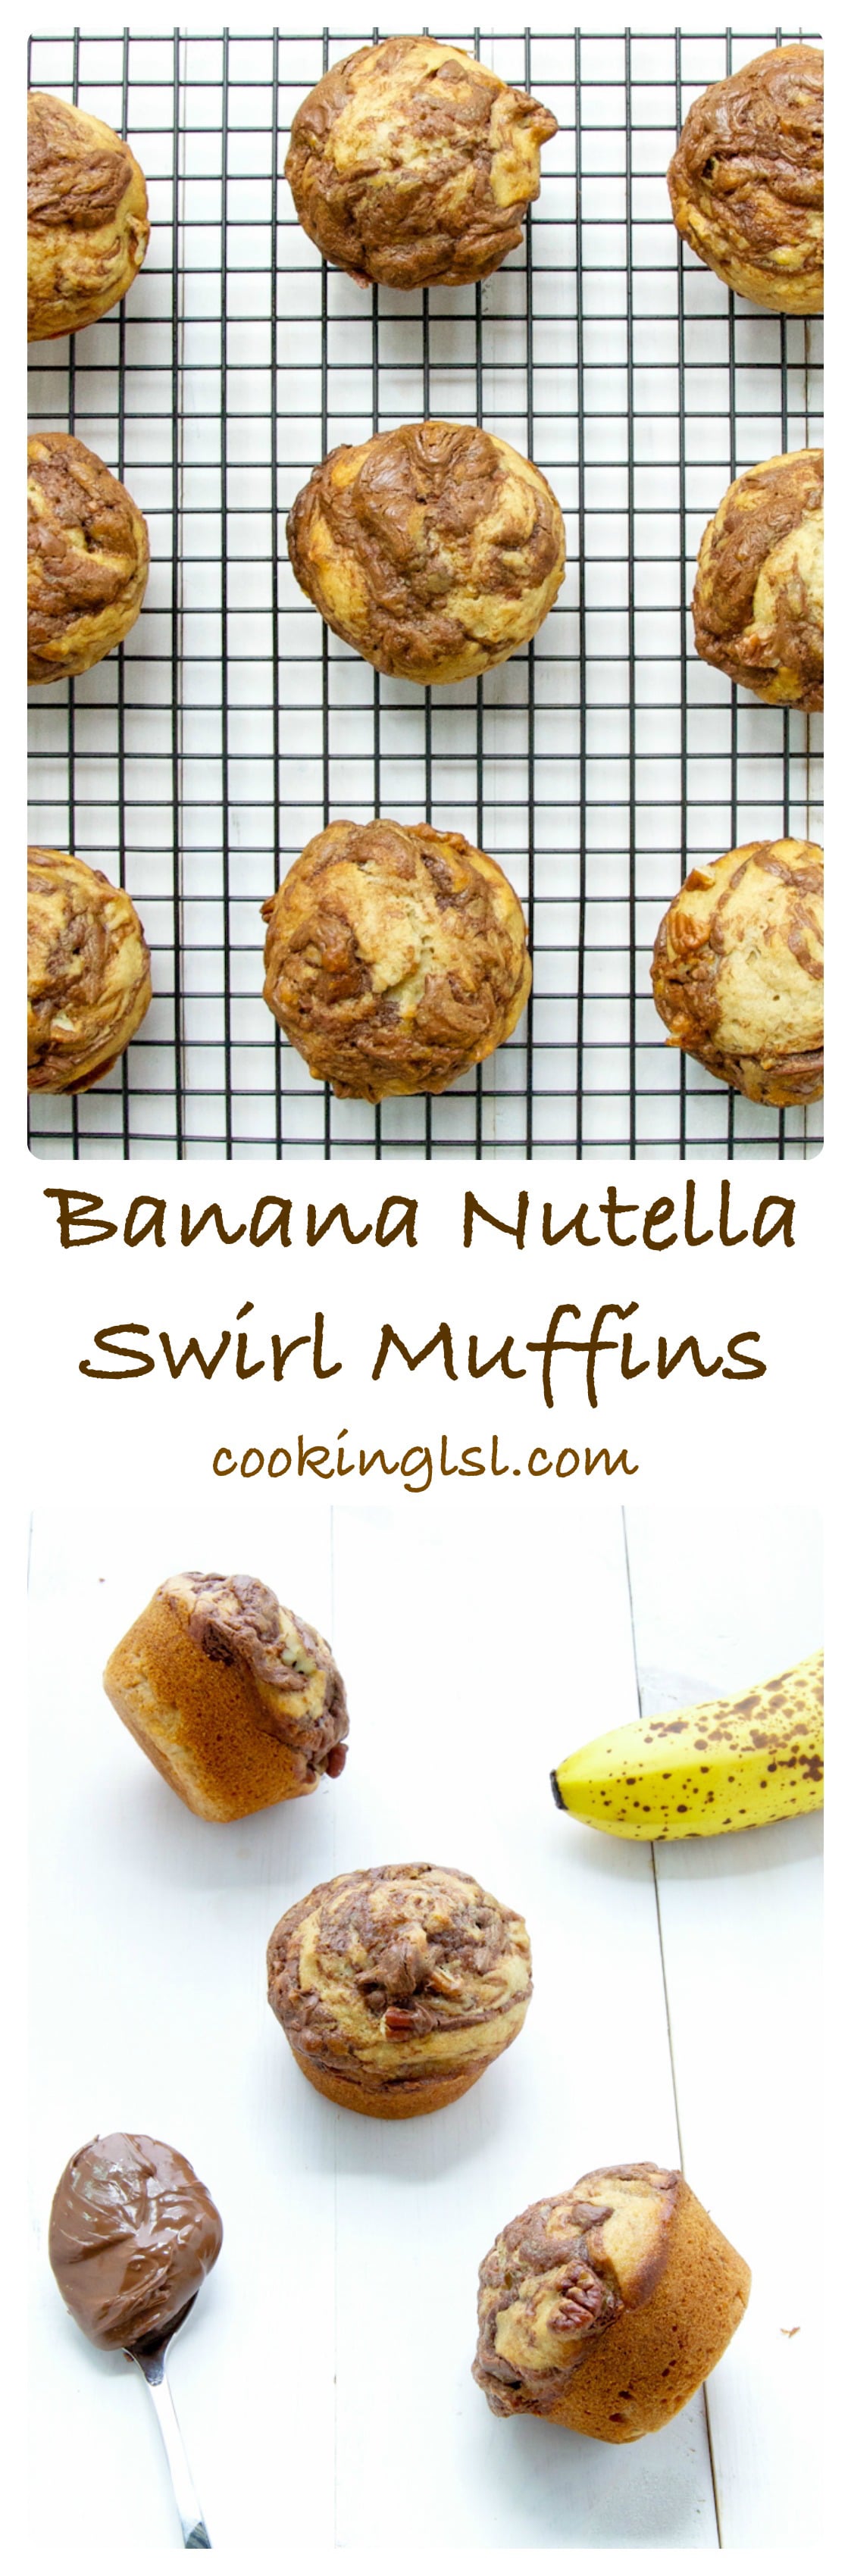 Nutella-Swirl-Banana-Muffins-With-Pecans